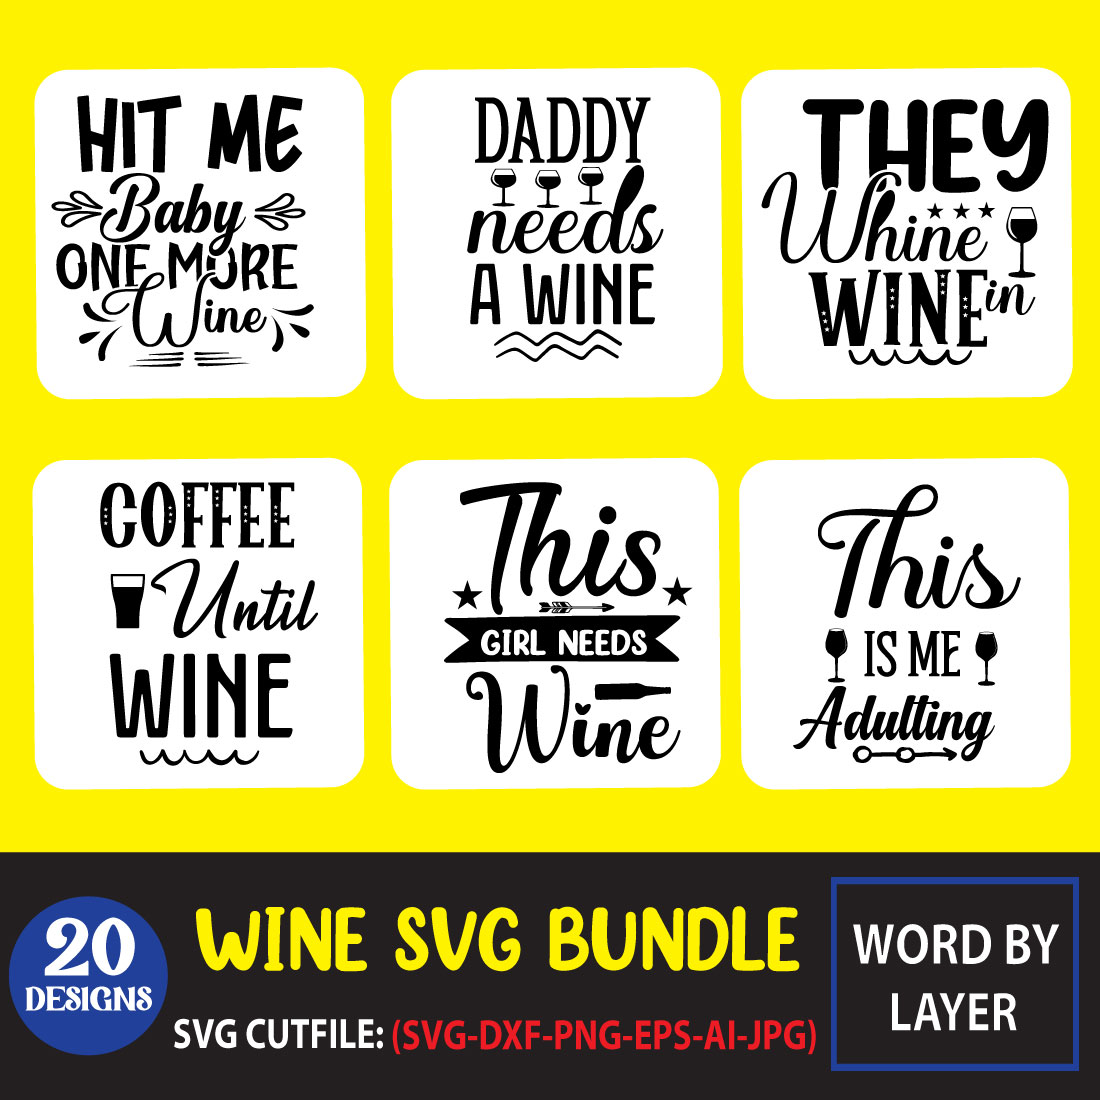 A set of amazing images for prints on the theme of wine